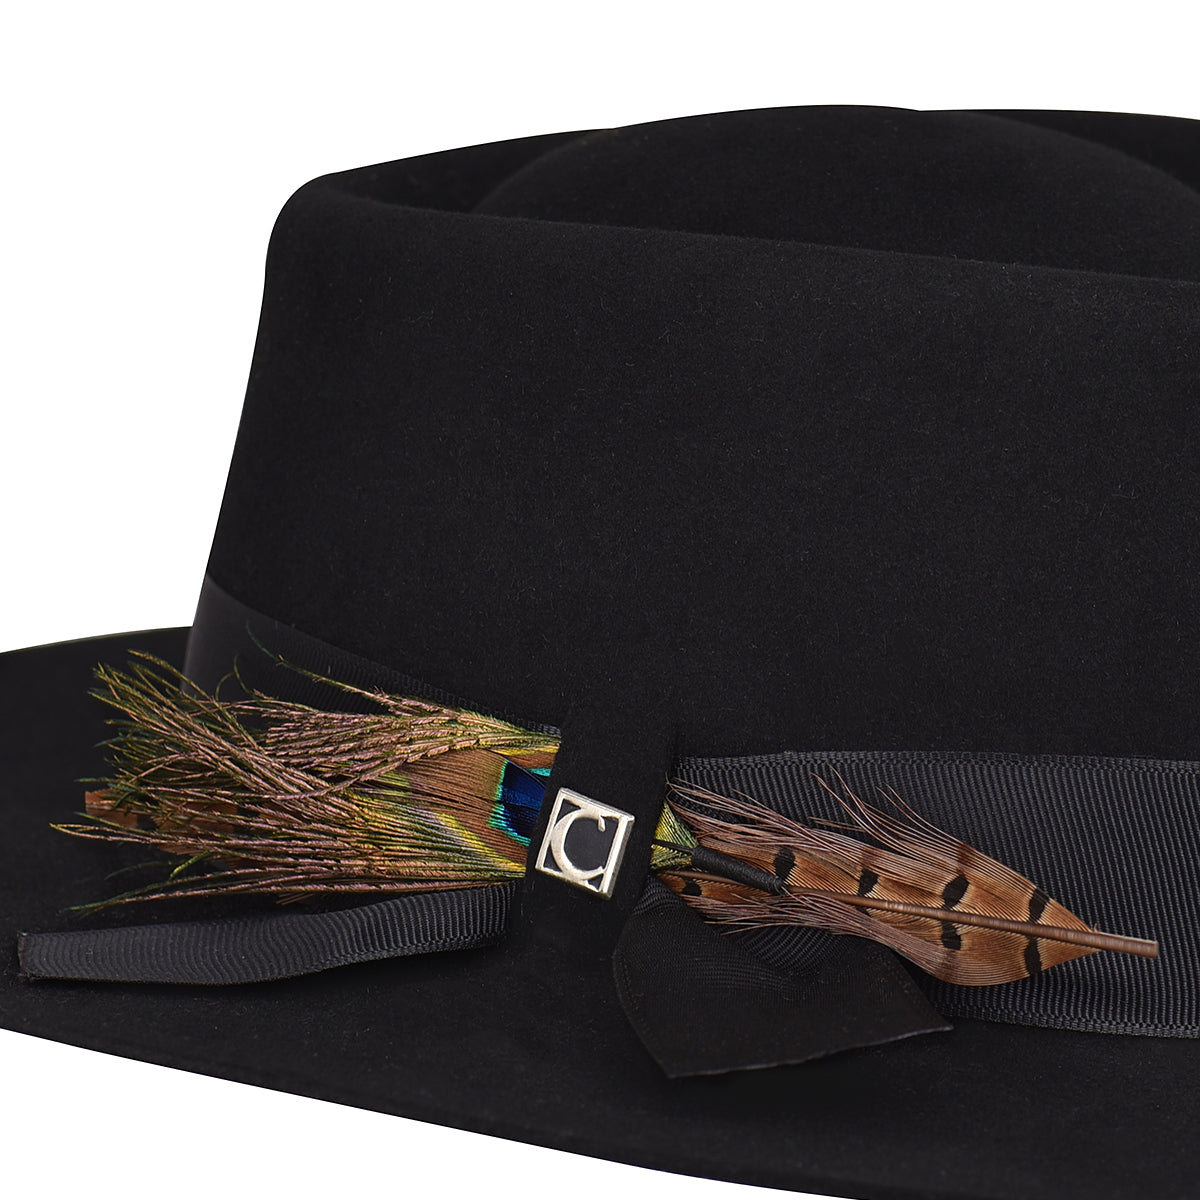 Cuadra black hat with fabric and feathers headband